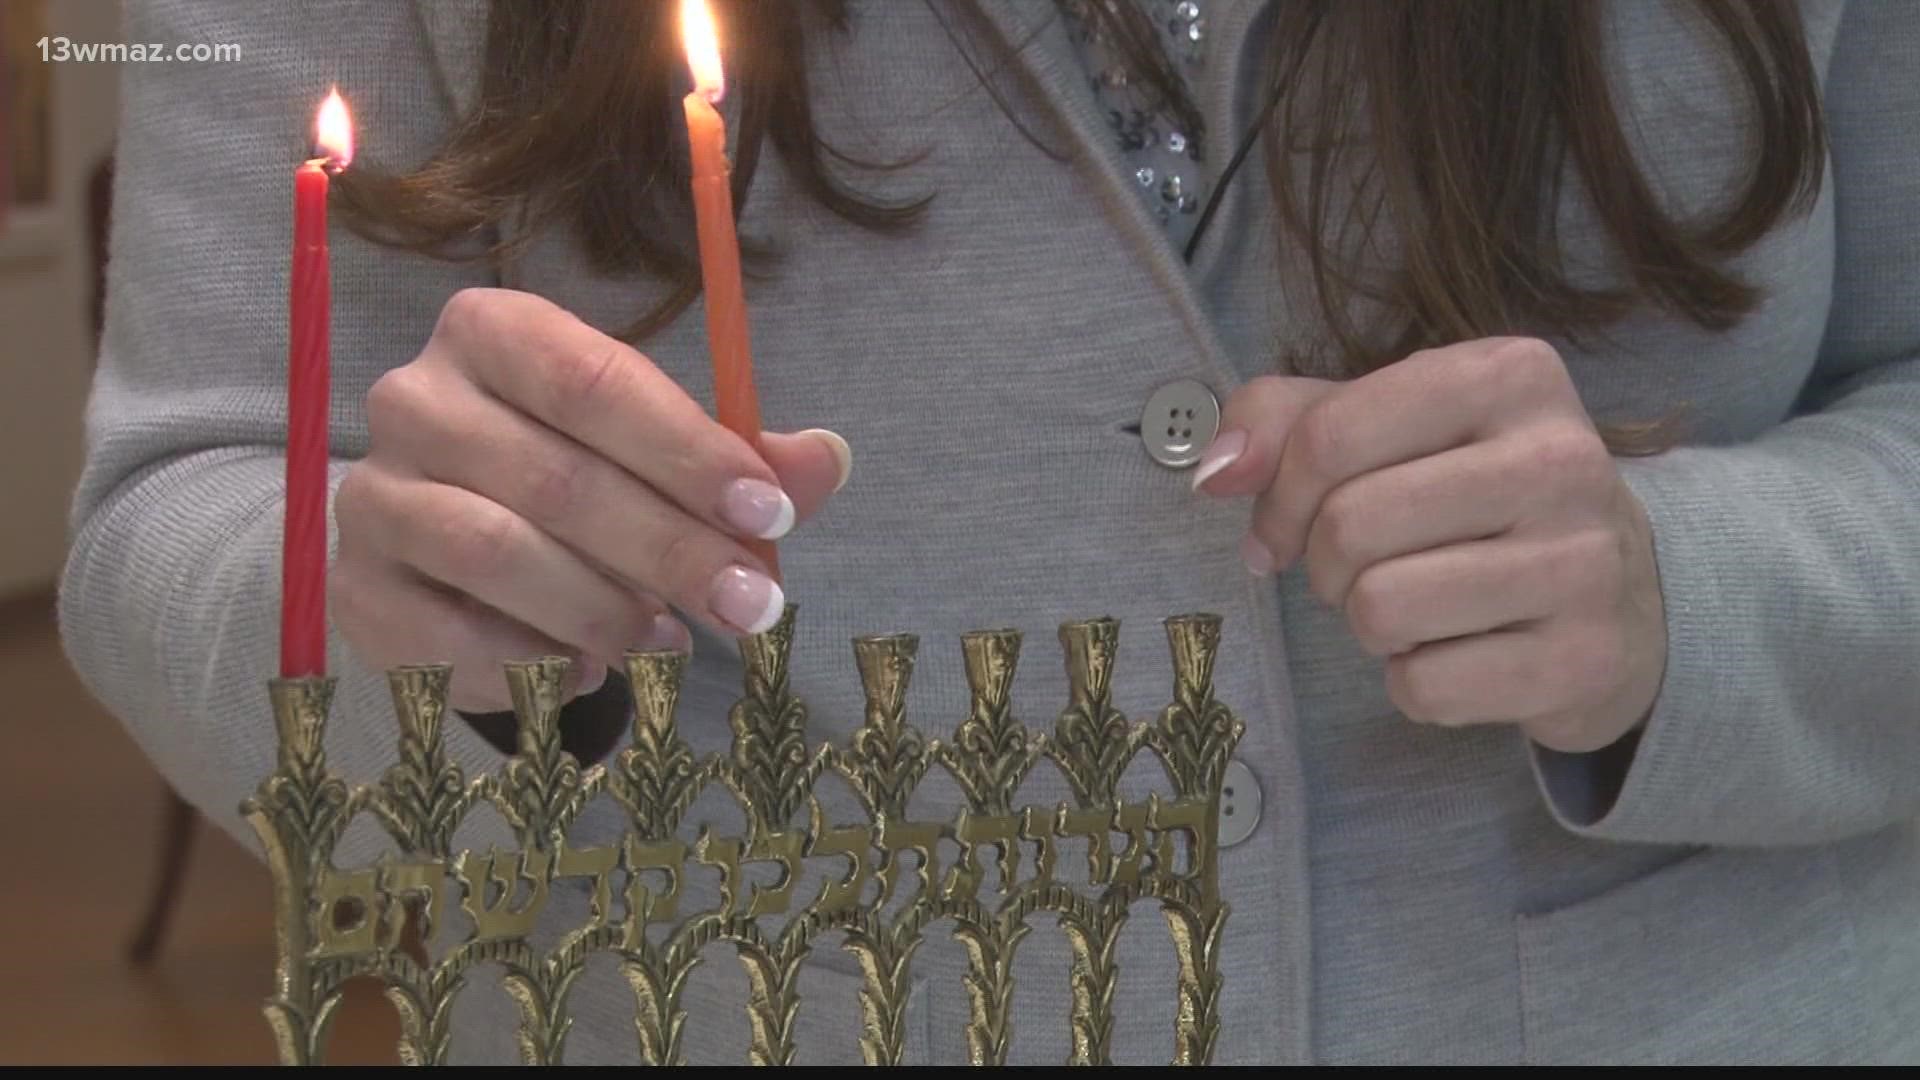 Bahar says they celebrate through the lighting of the menorah for eight consecutive days, playing traditional Jewish games like the dreidel, and eating fried foods.